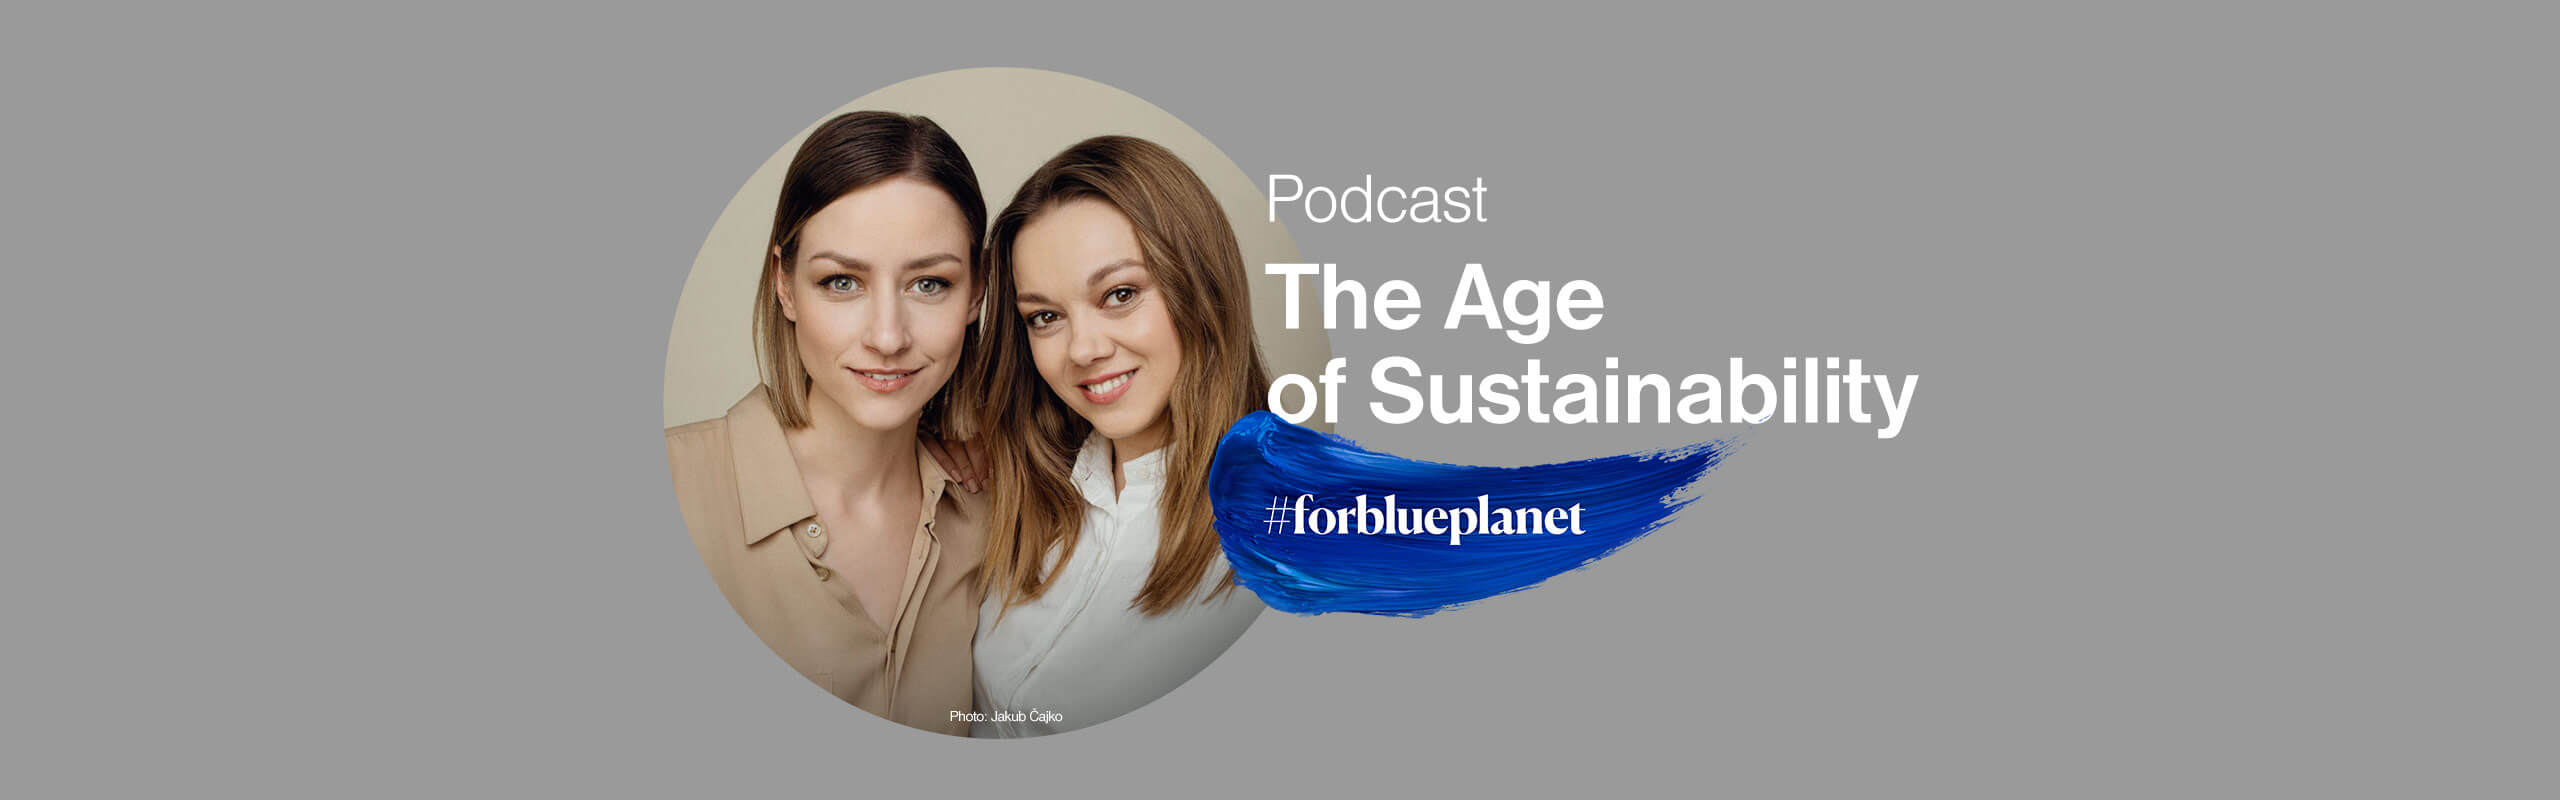 Podcast The Age of Sustainability